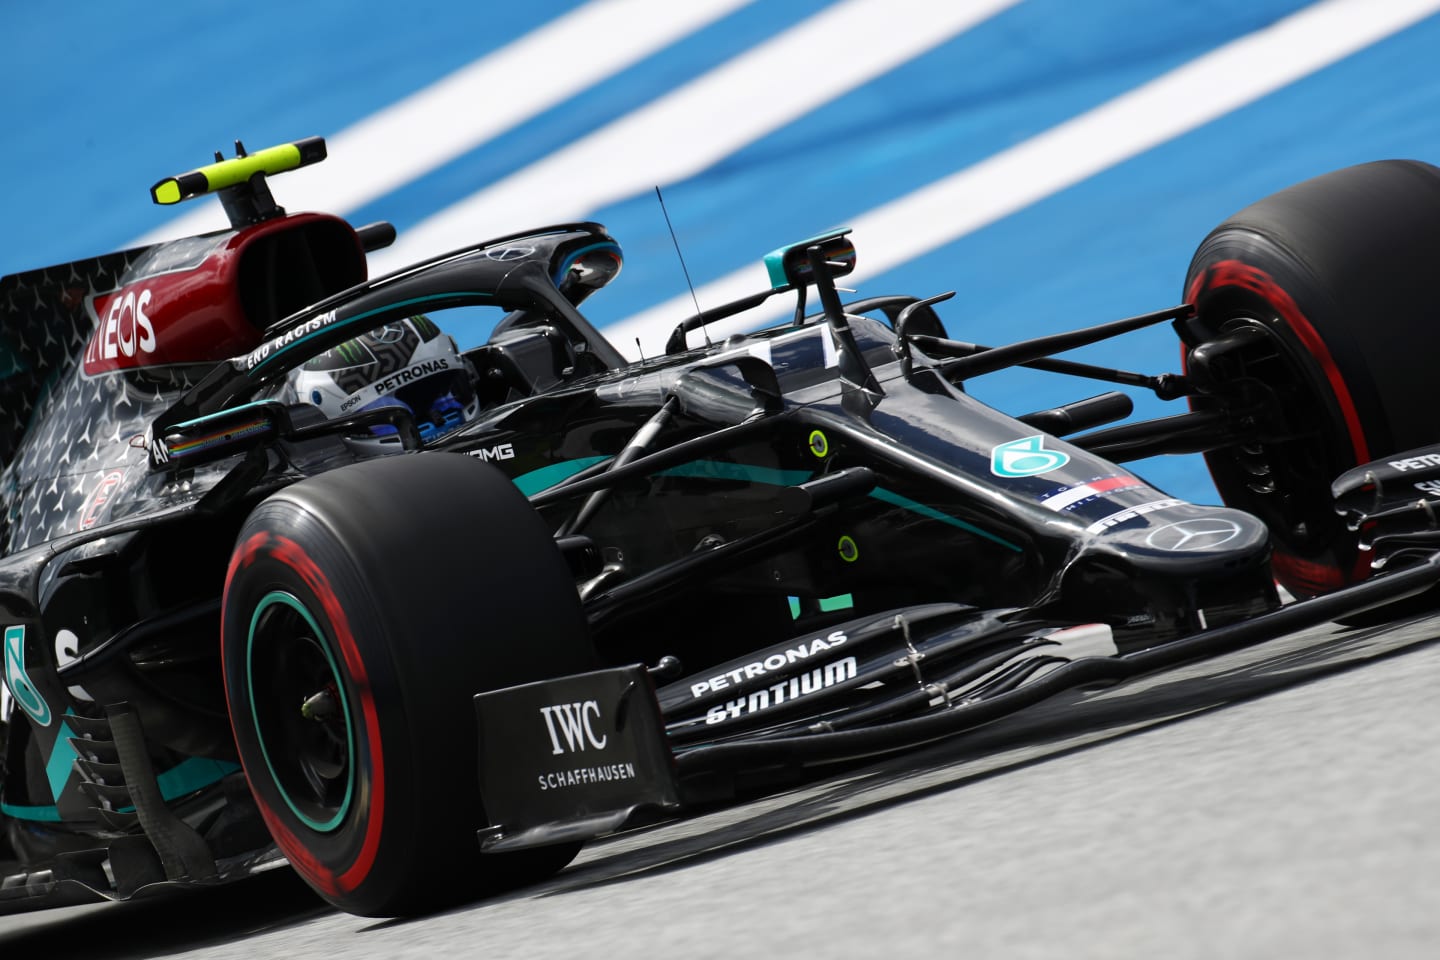 SPIELBERG, AUSTRIA - JULY 03: Valtteri Bottas of Finland driving the (77) Mercedes AMG Petronas F1 Team Mercedes W11 on track during practice for the F1 Grand Prix of Austria at Red Bull Ring on July 03, 2020 in Spielberg, Austria. (Photo by Mark Thompson/Getty Images,)